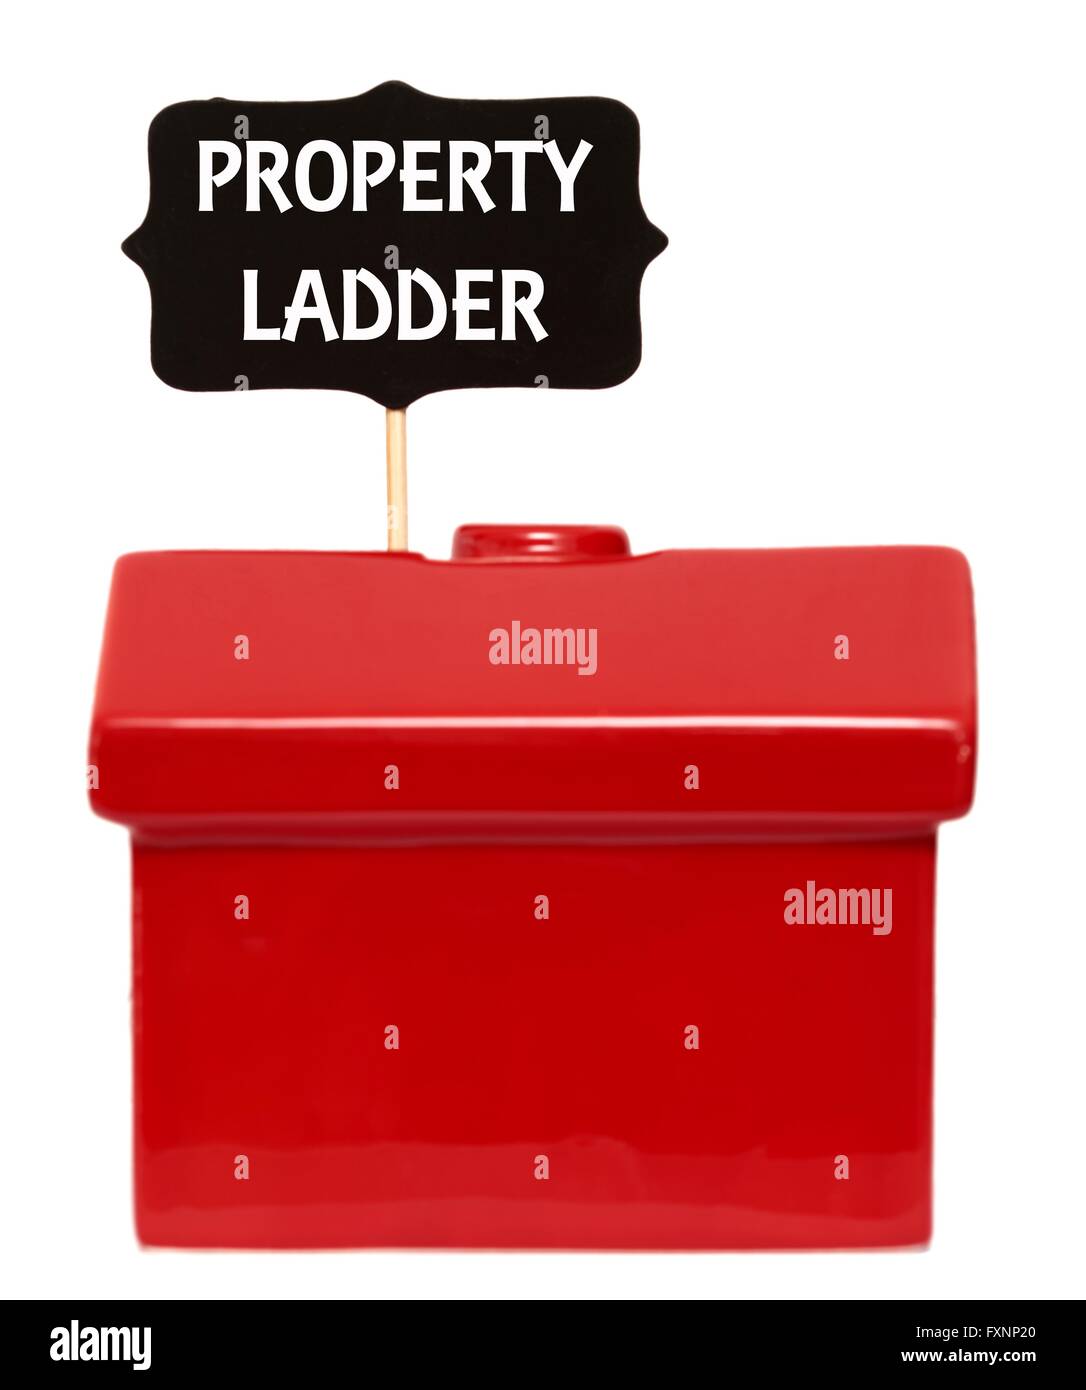 Red house with property ladder sign concept Stock Photo